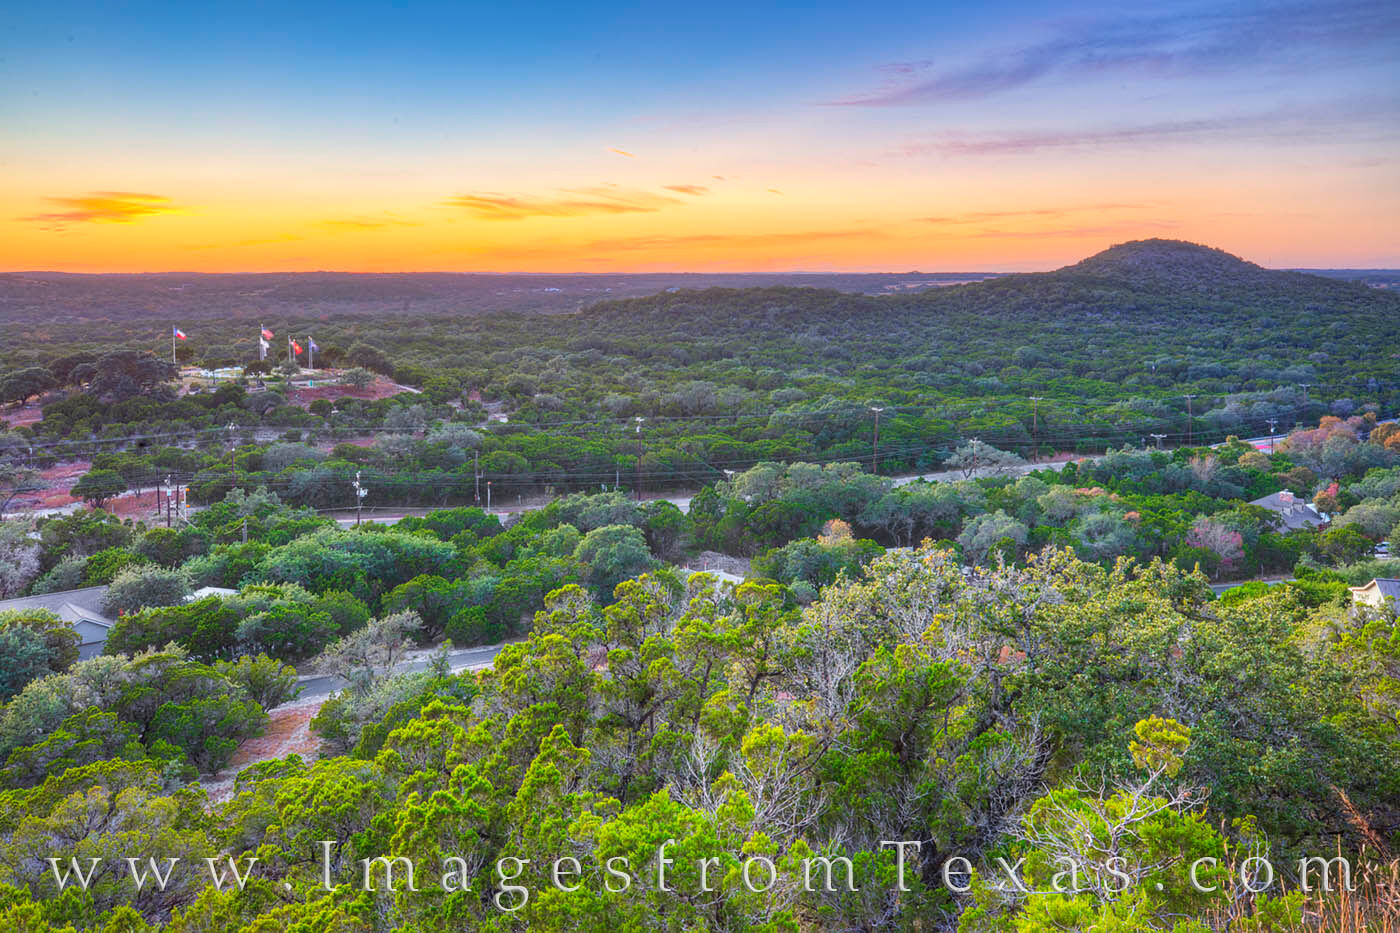 The sky turns beautiful shades of orange and blue just after sunset on a November evening. This view comes from Old Baldy, a...